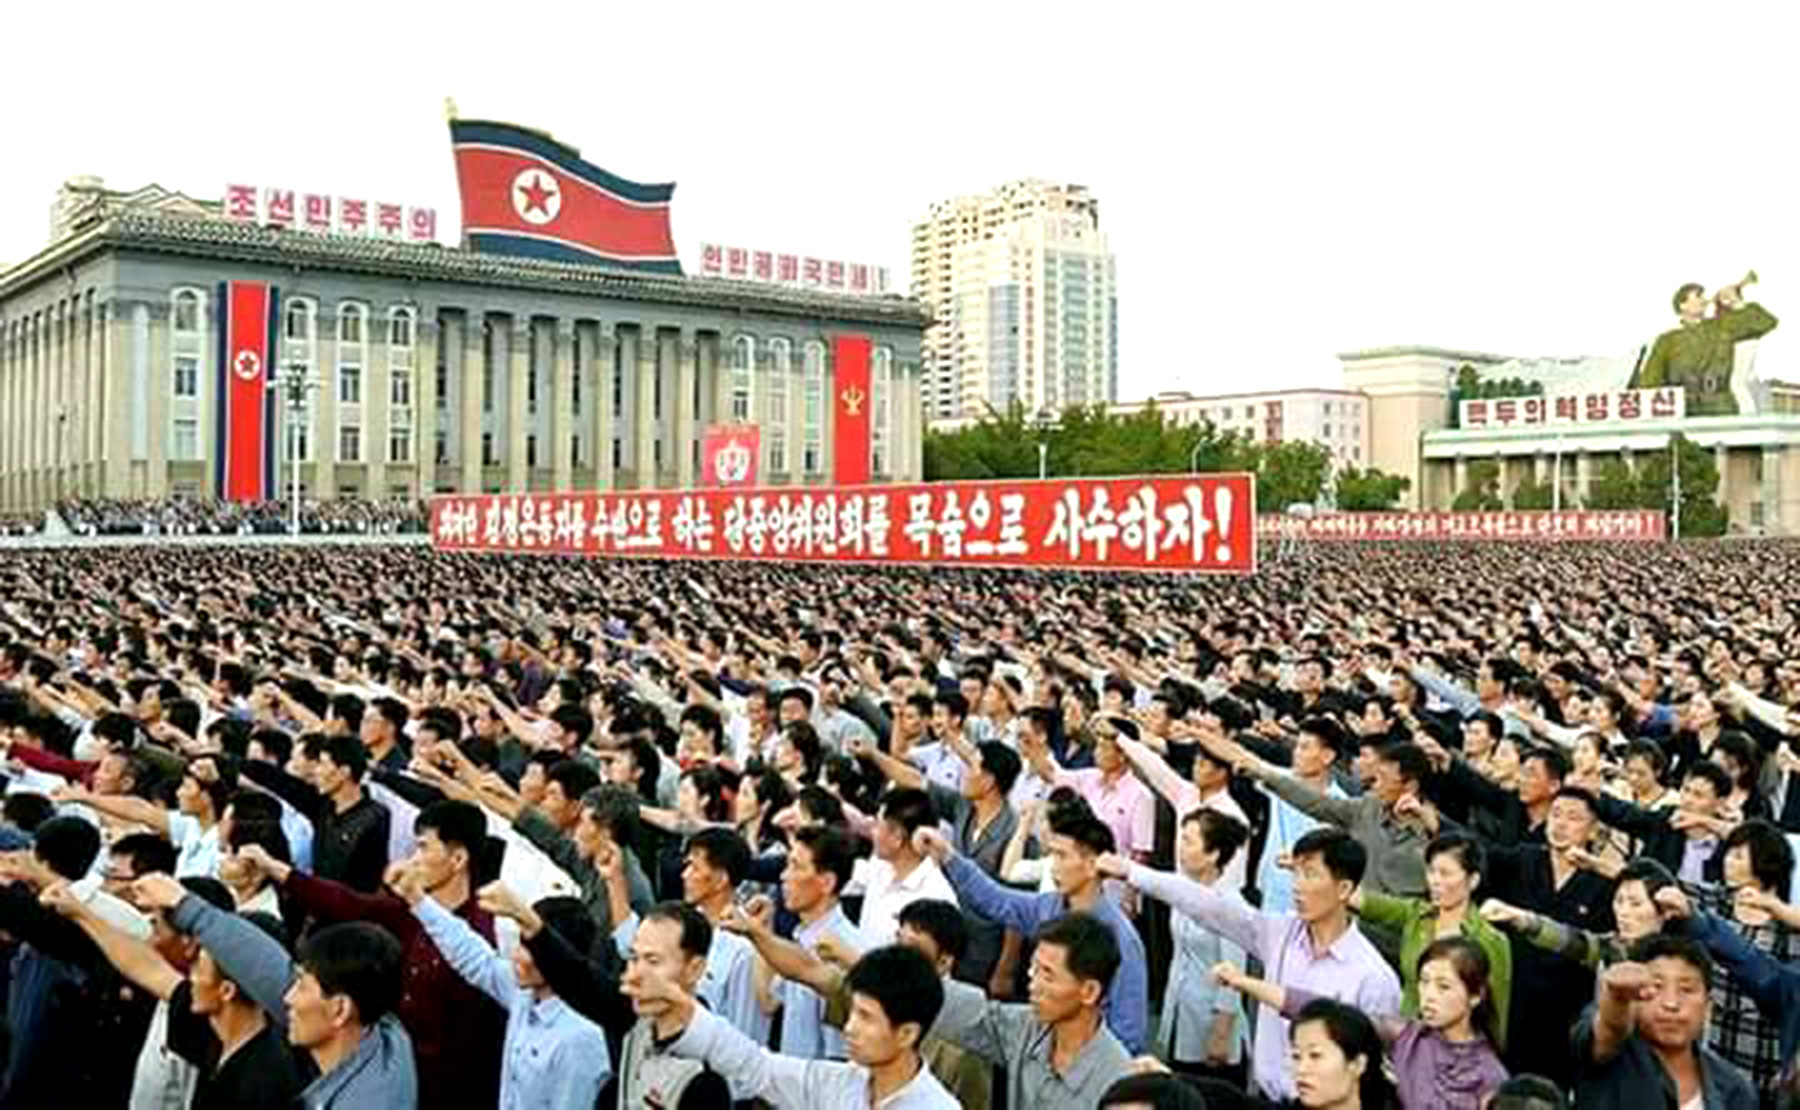 Procession-of-Communist-Party-in-North-Korea-against-threat-Of-American-Imperialism-3.jpg